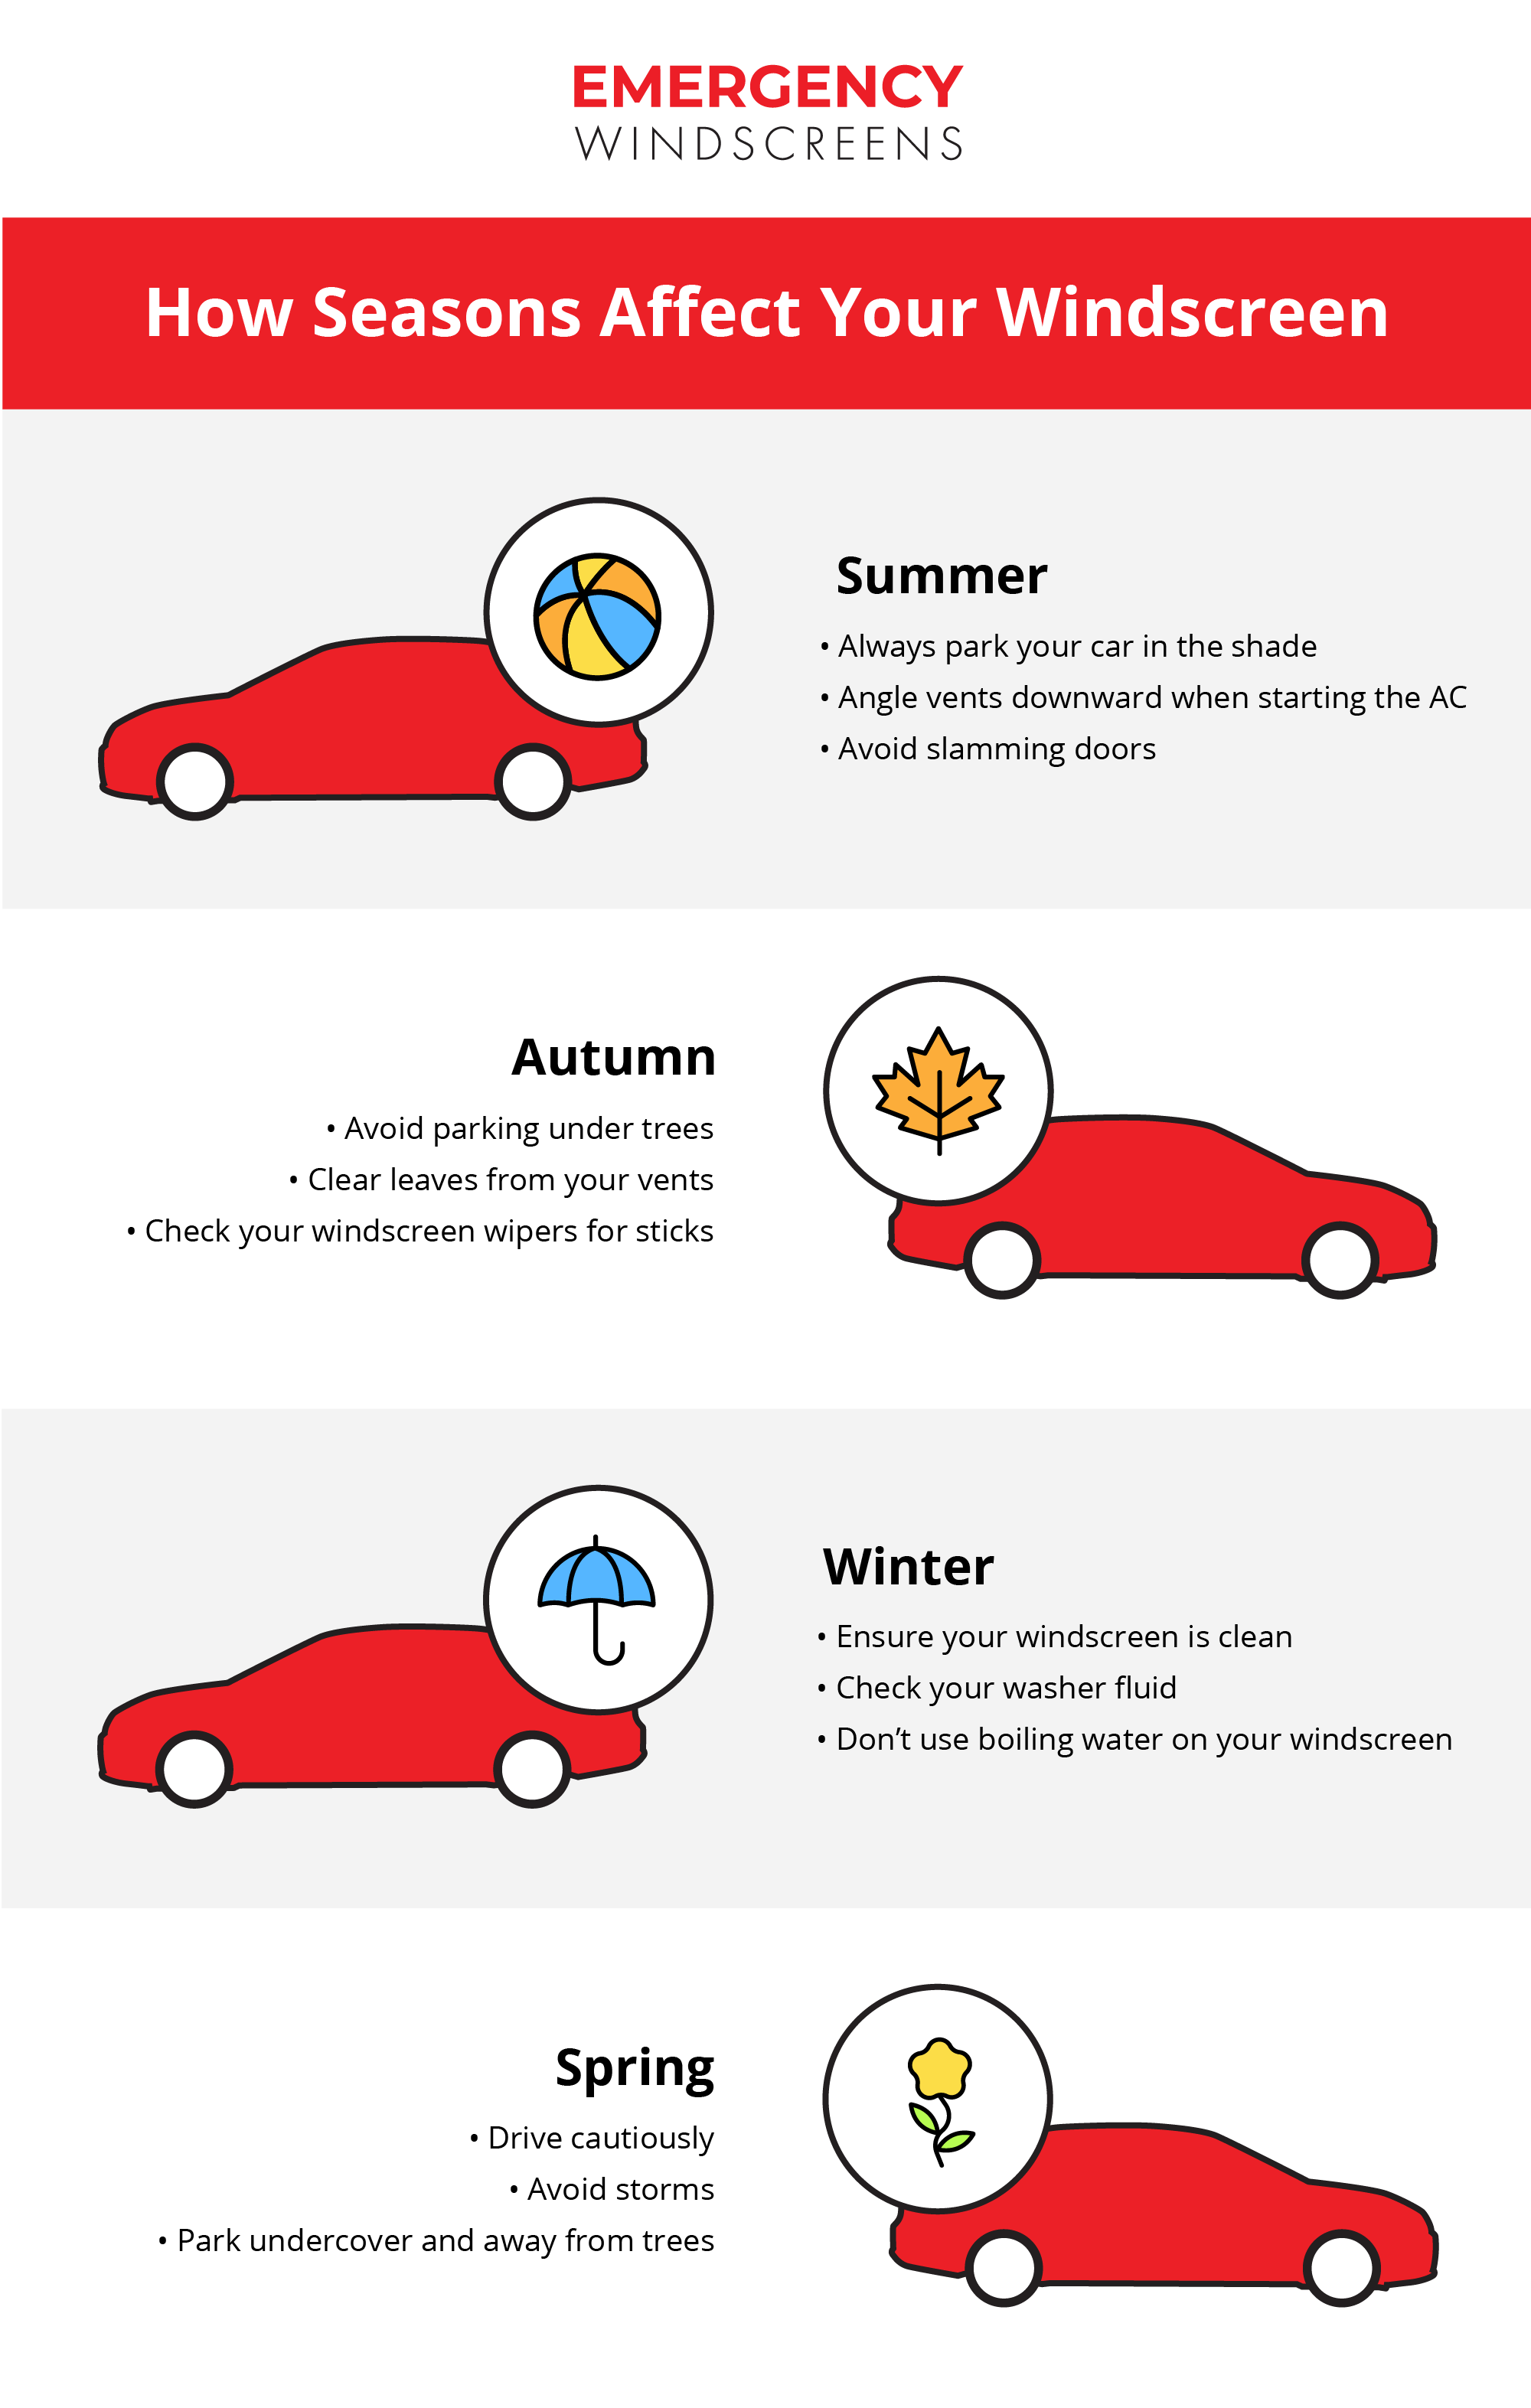 How Seasons Affect Your Windscreen Infographic